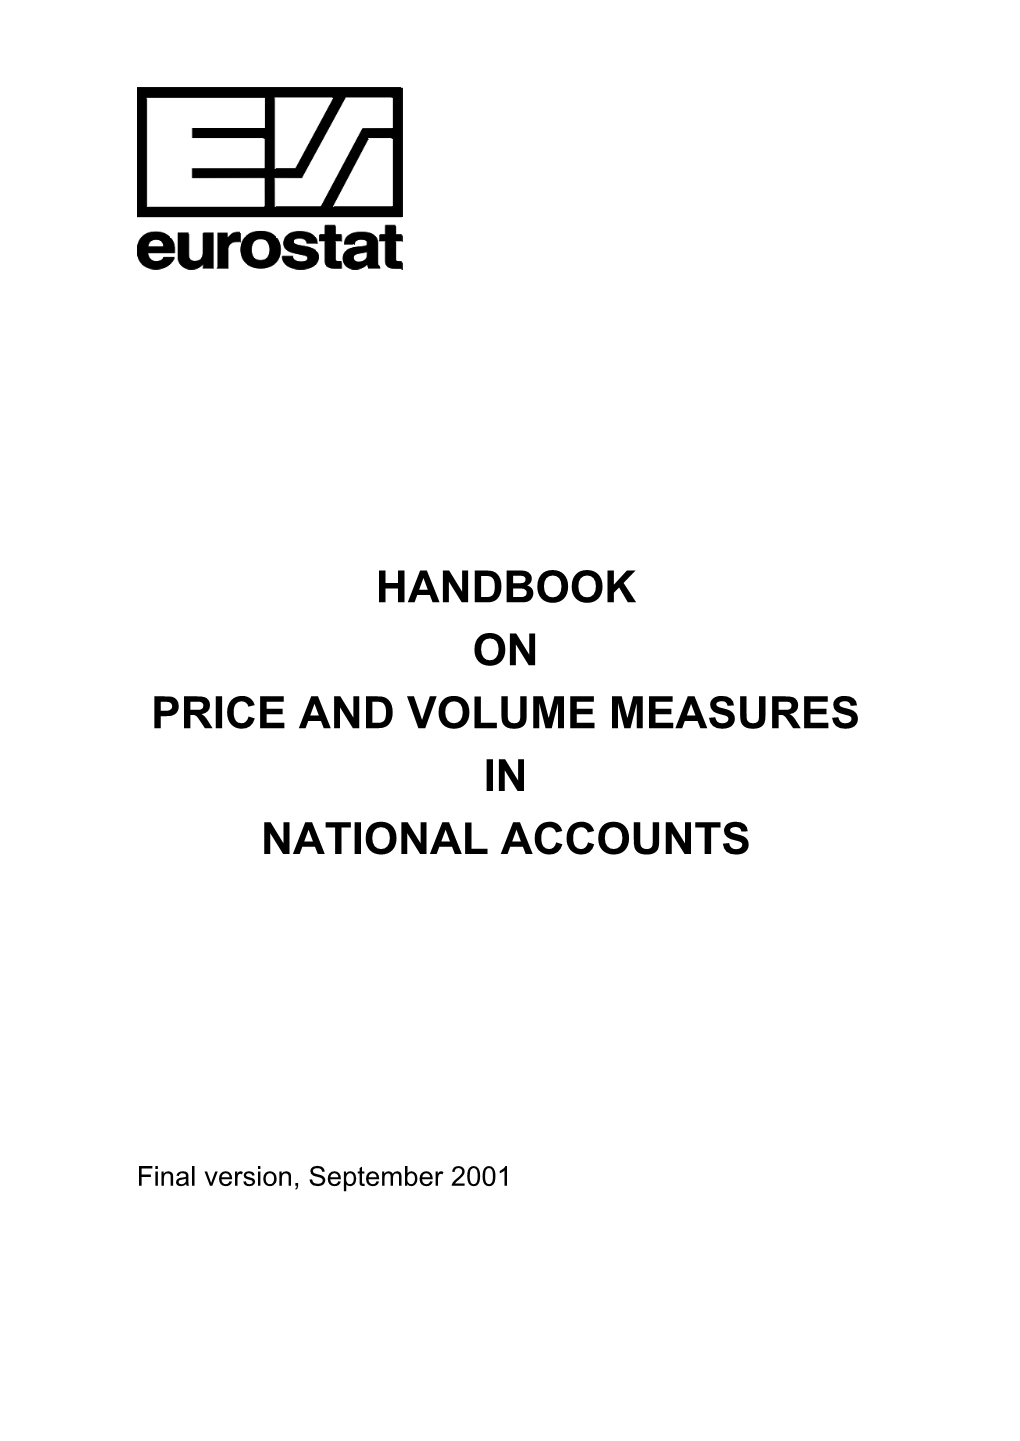 Handbook on Price and Volume Measures in National Accounts